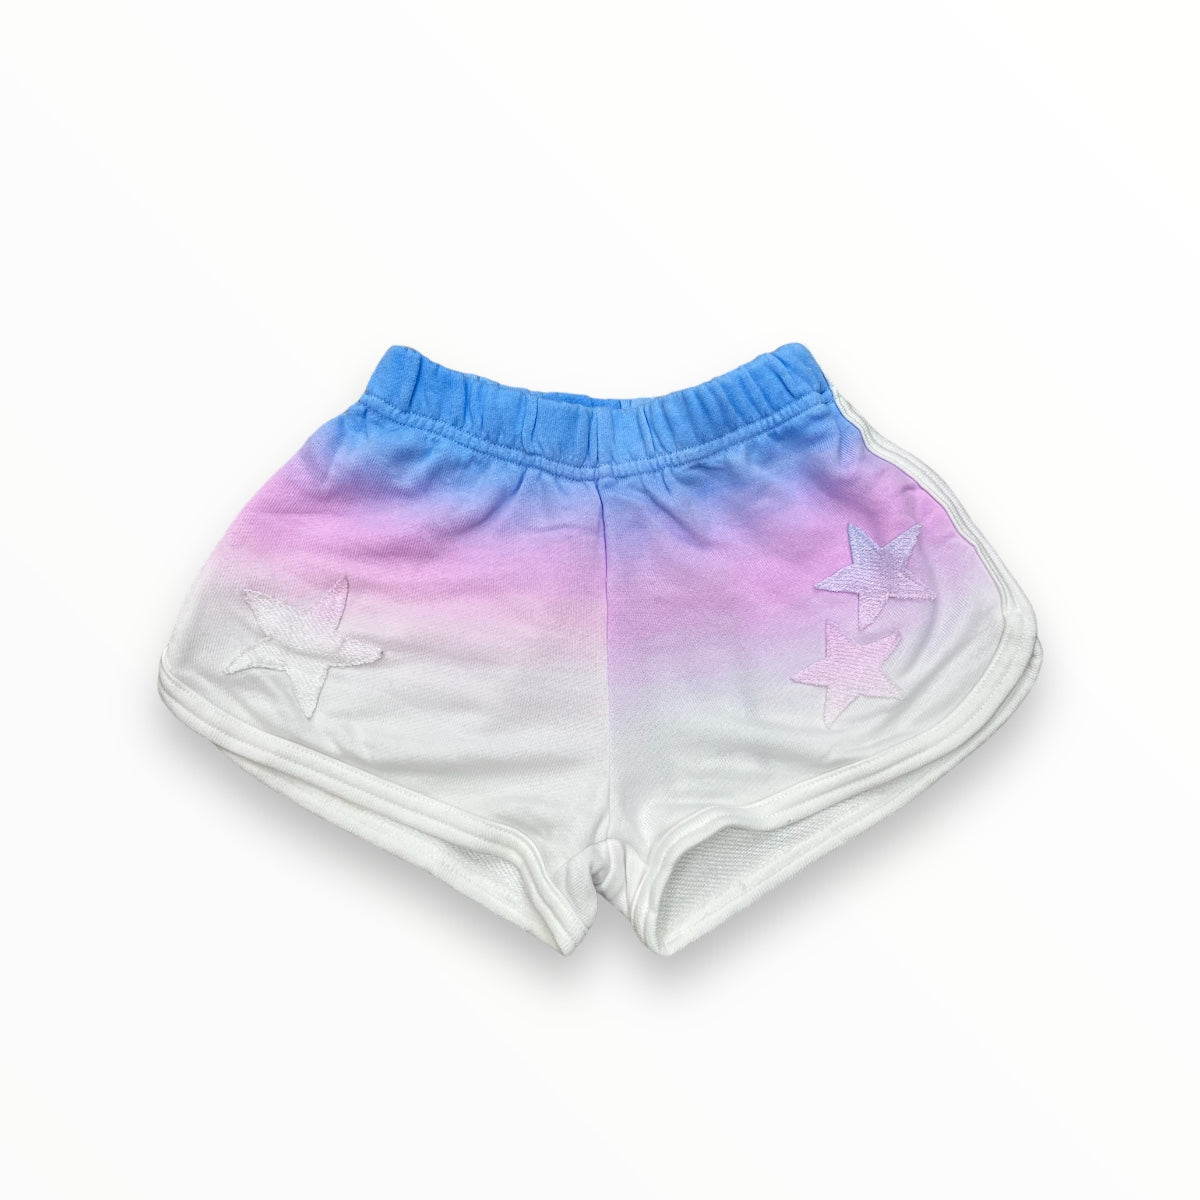 FLOWERS BY ZOE STAR PATCH SHORTS -  BLUE/PINK/WHITE OMBRE